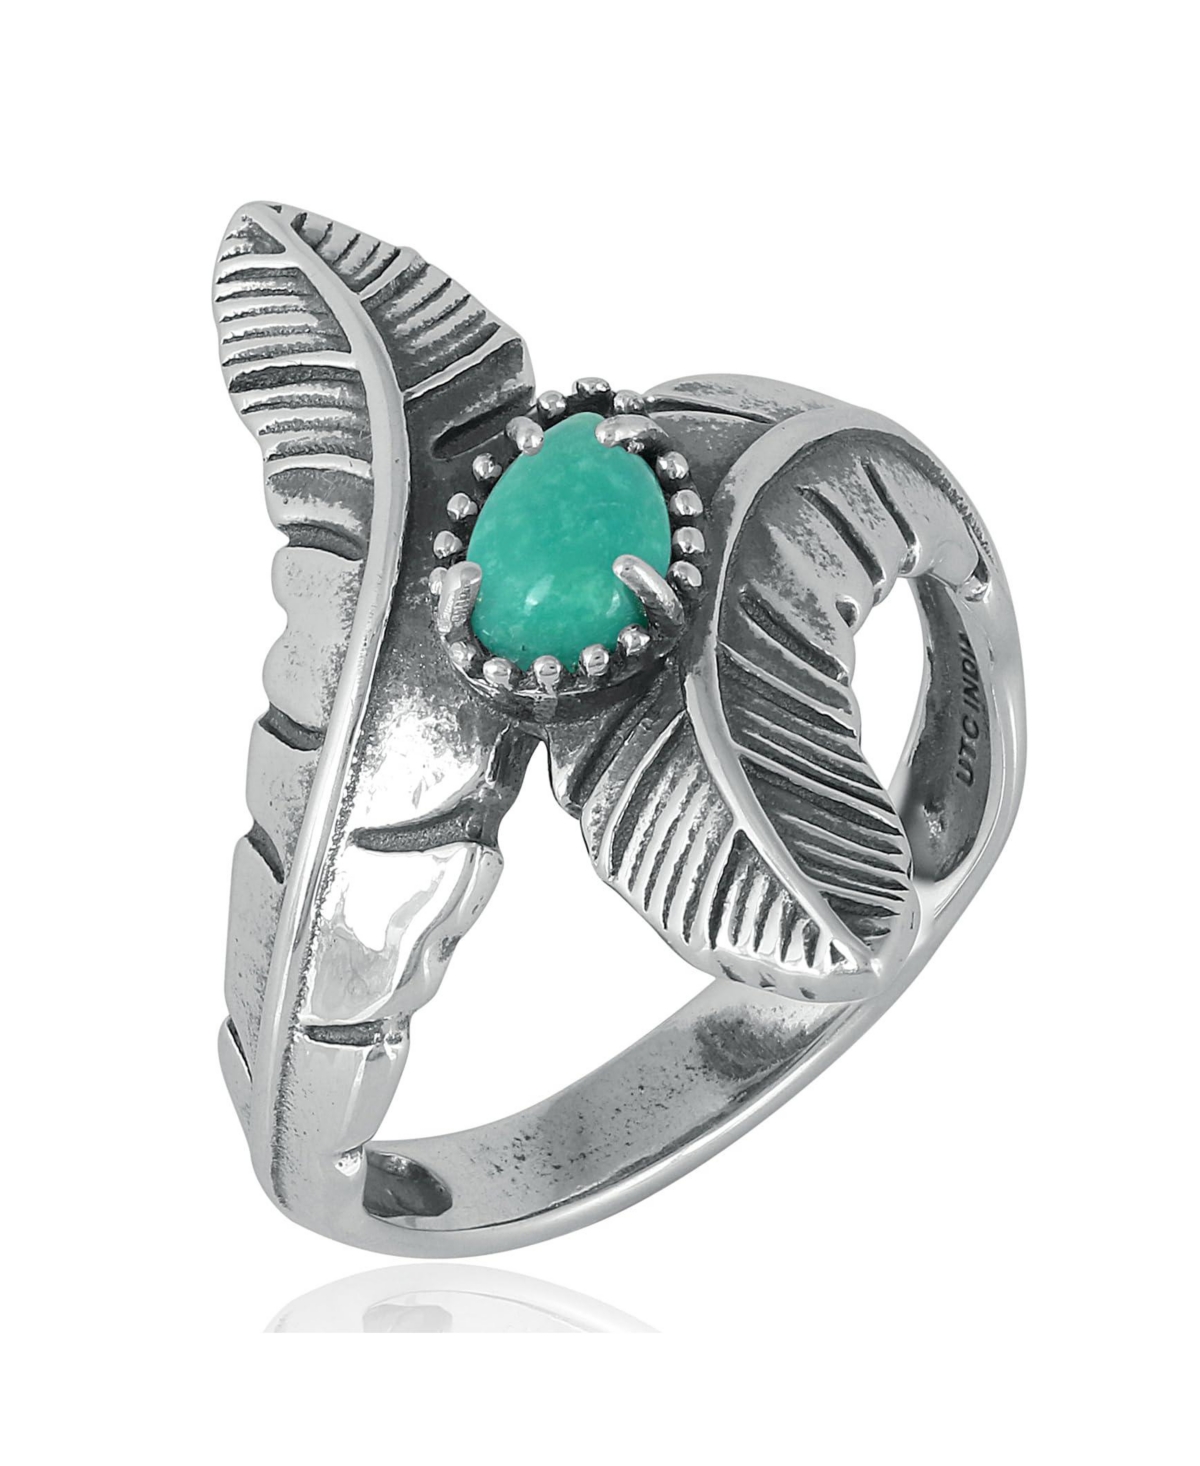 Southwestern Double Feather Ring-Sterling Silver Band with Turquoise Gemstone, Size 5 - 7 - Green turquoise